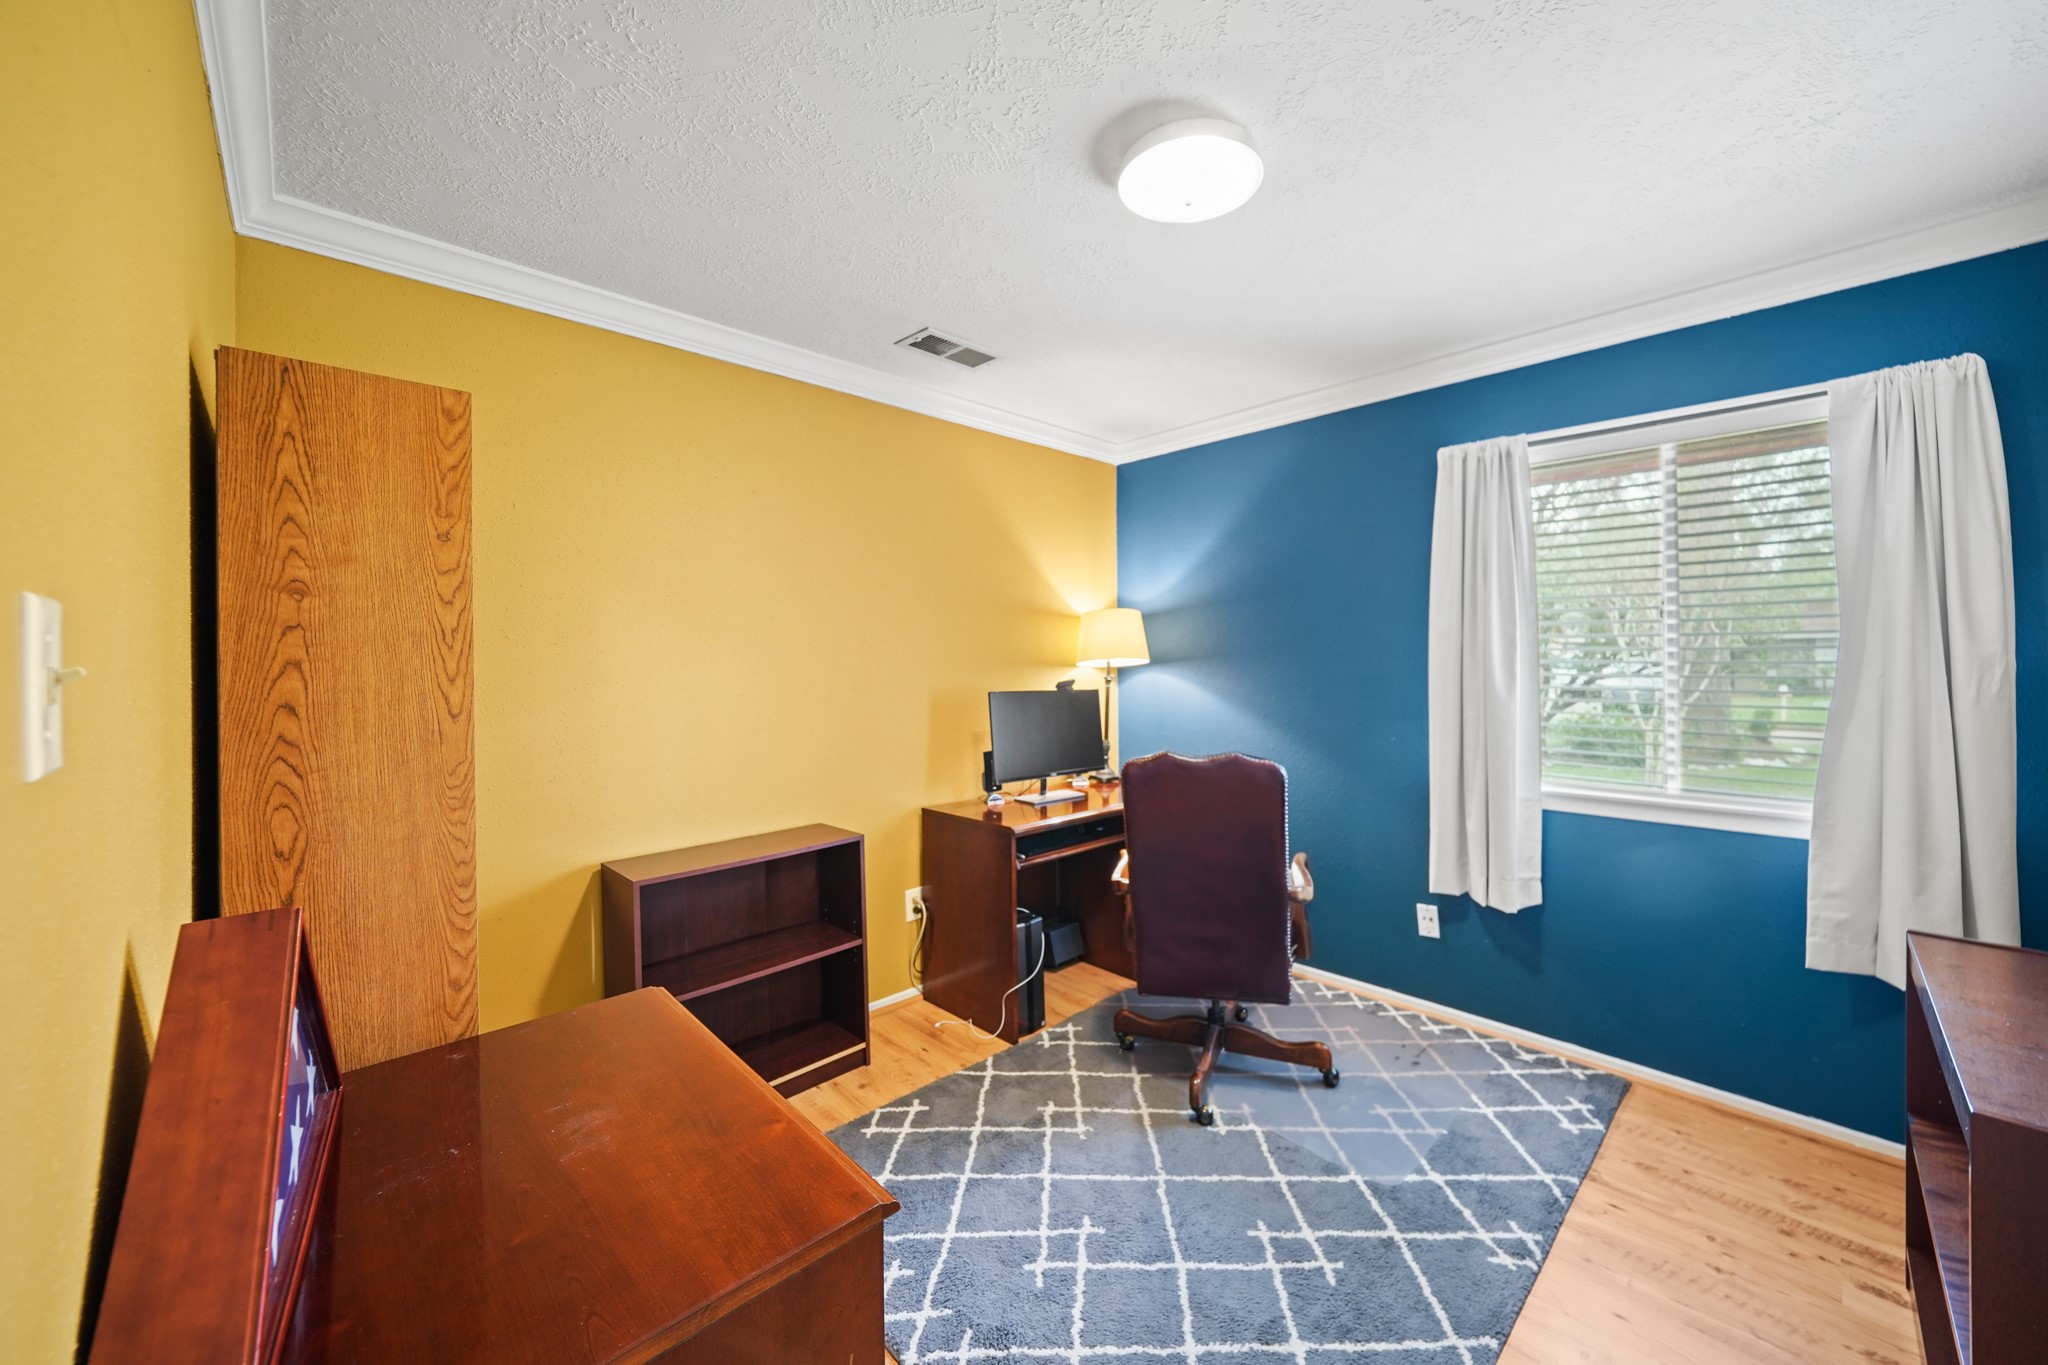 Your guests will rest comfortably in either of the spacious secondary bedrooms. This bedroom has designer paint, fantastic natural light and plenty of room for furniture, toys, games, etc.